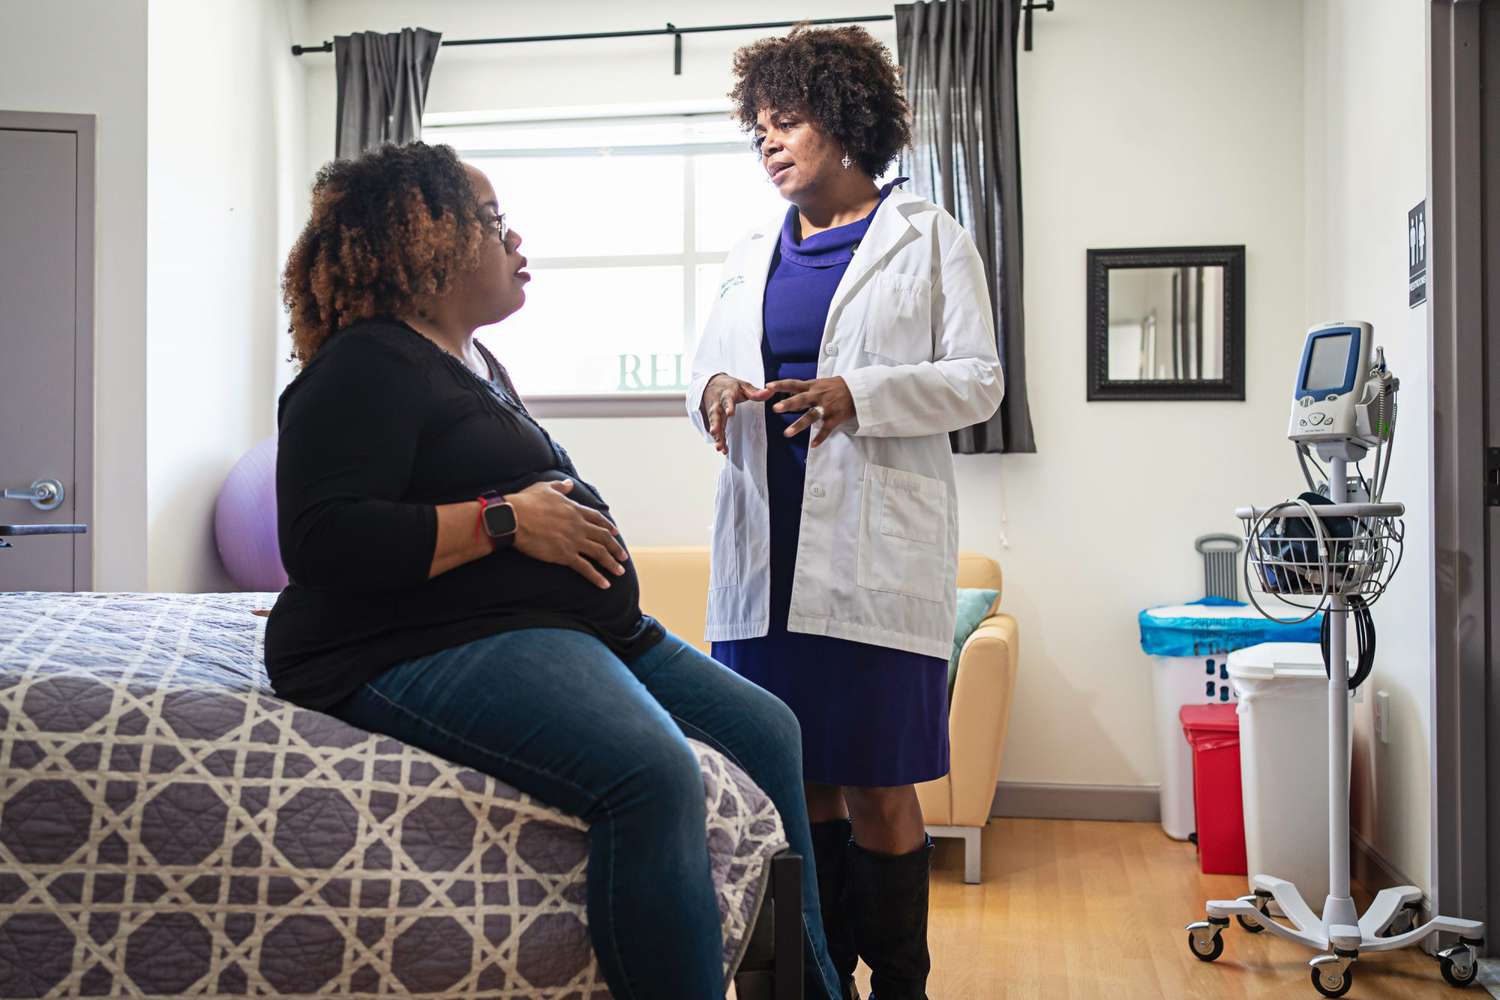 Dr. Joia Crear Perry with Ebony Roebuck, Director of Midwifery at the Community of Hope Family Health and Birth Center, Washington, D.C., on March 2, 2020.